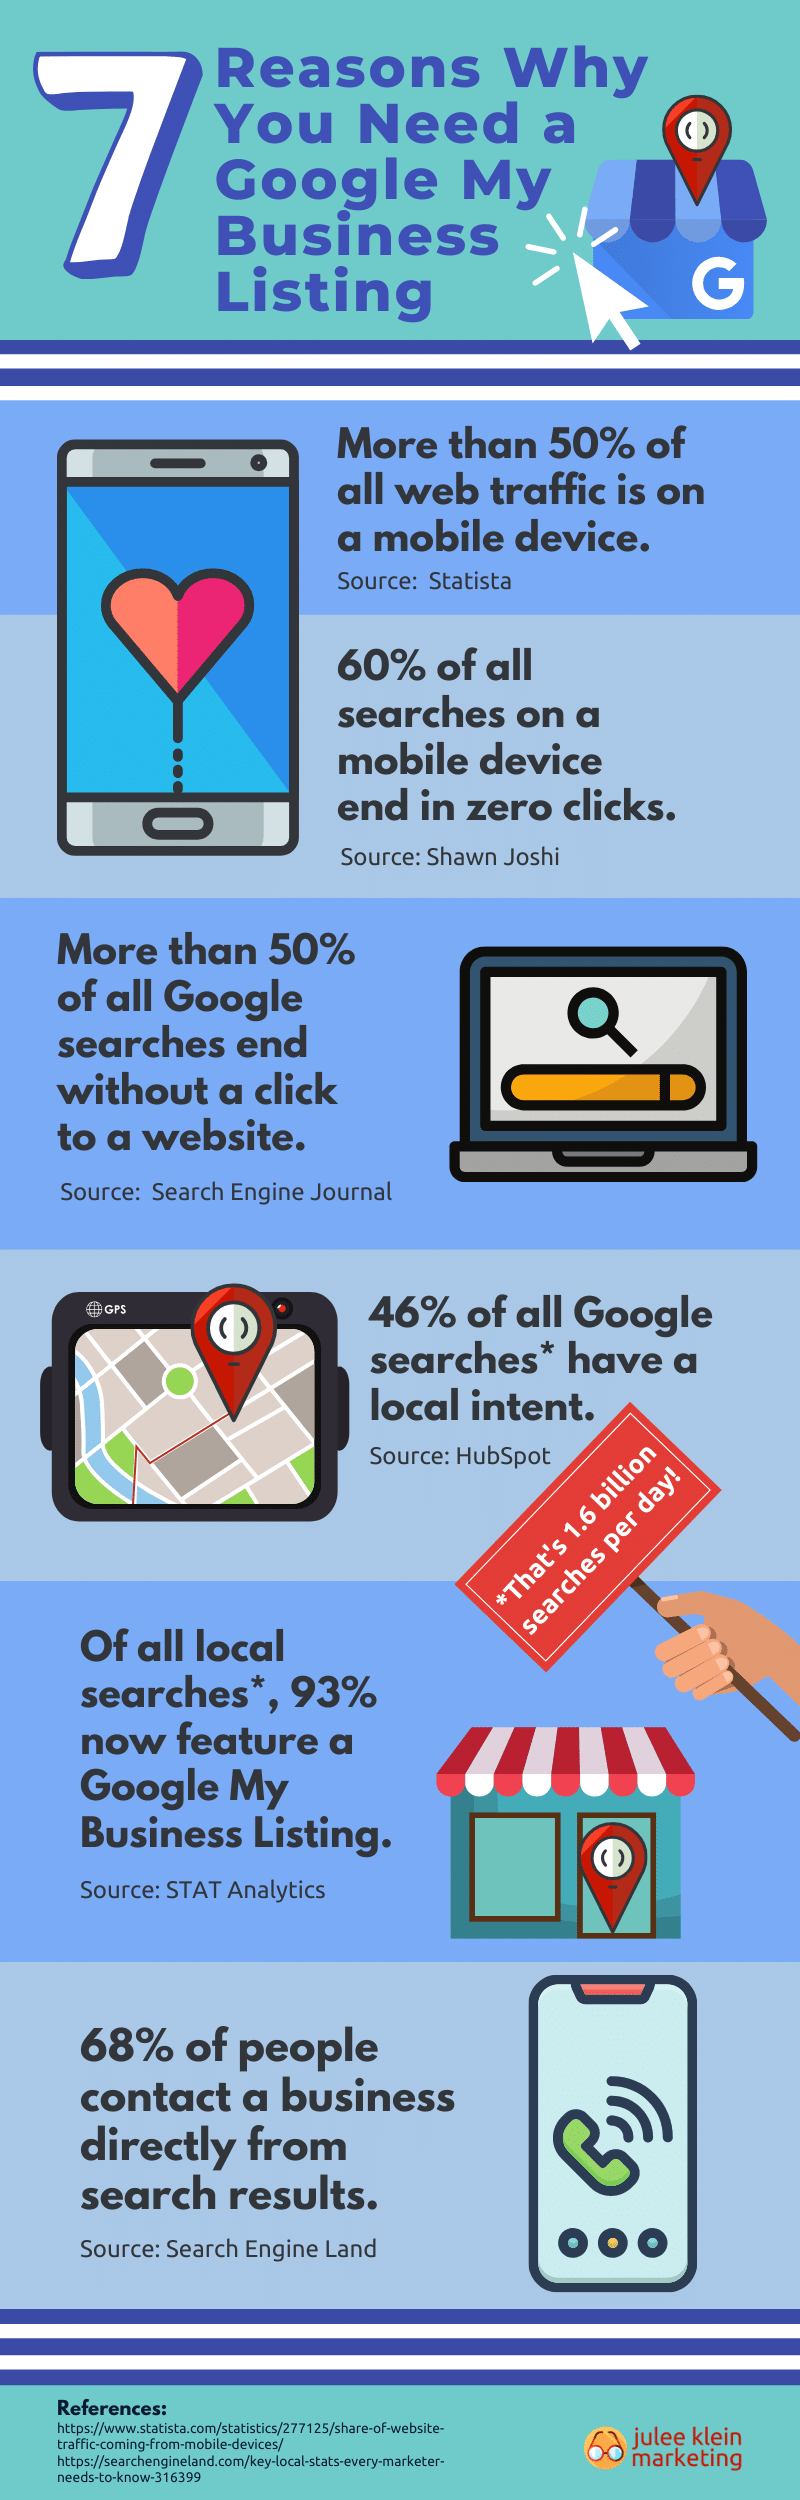 Infographic 7 Reasons Wy You Need a Google My Business Listing